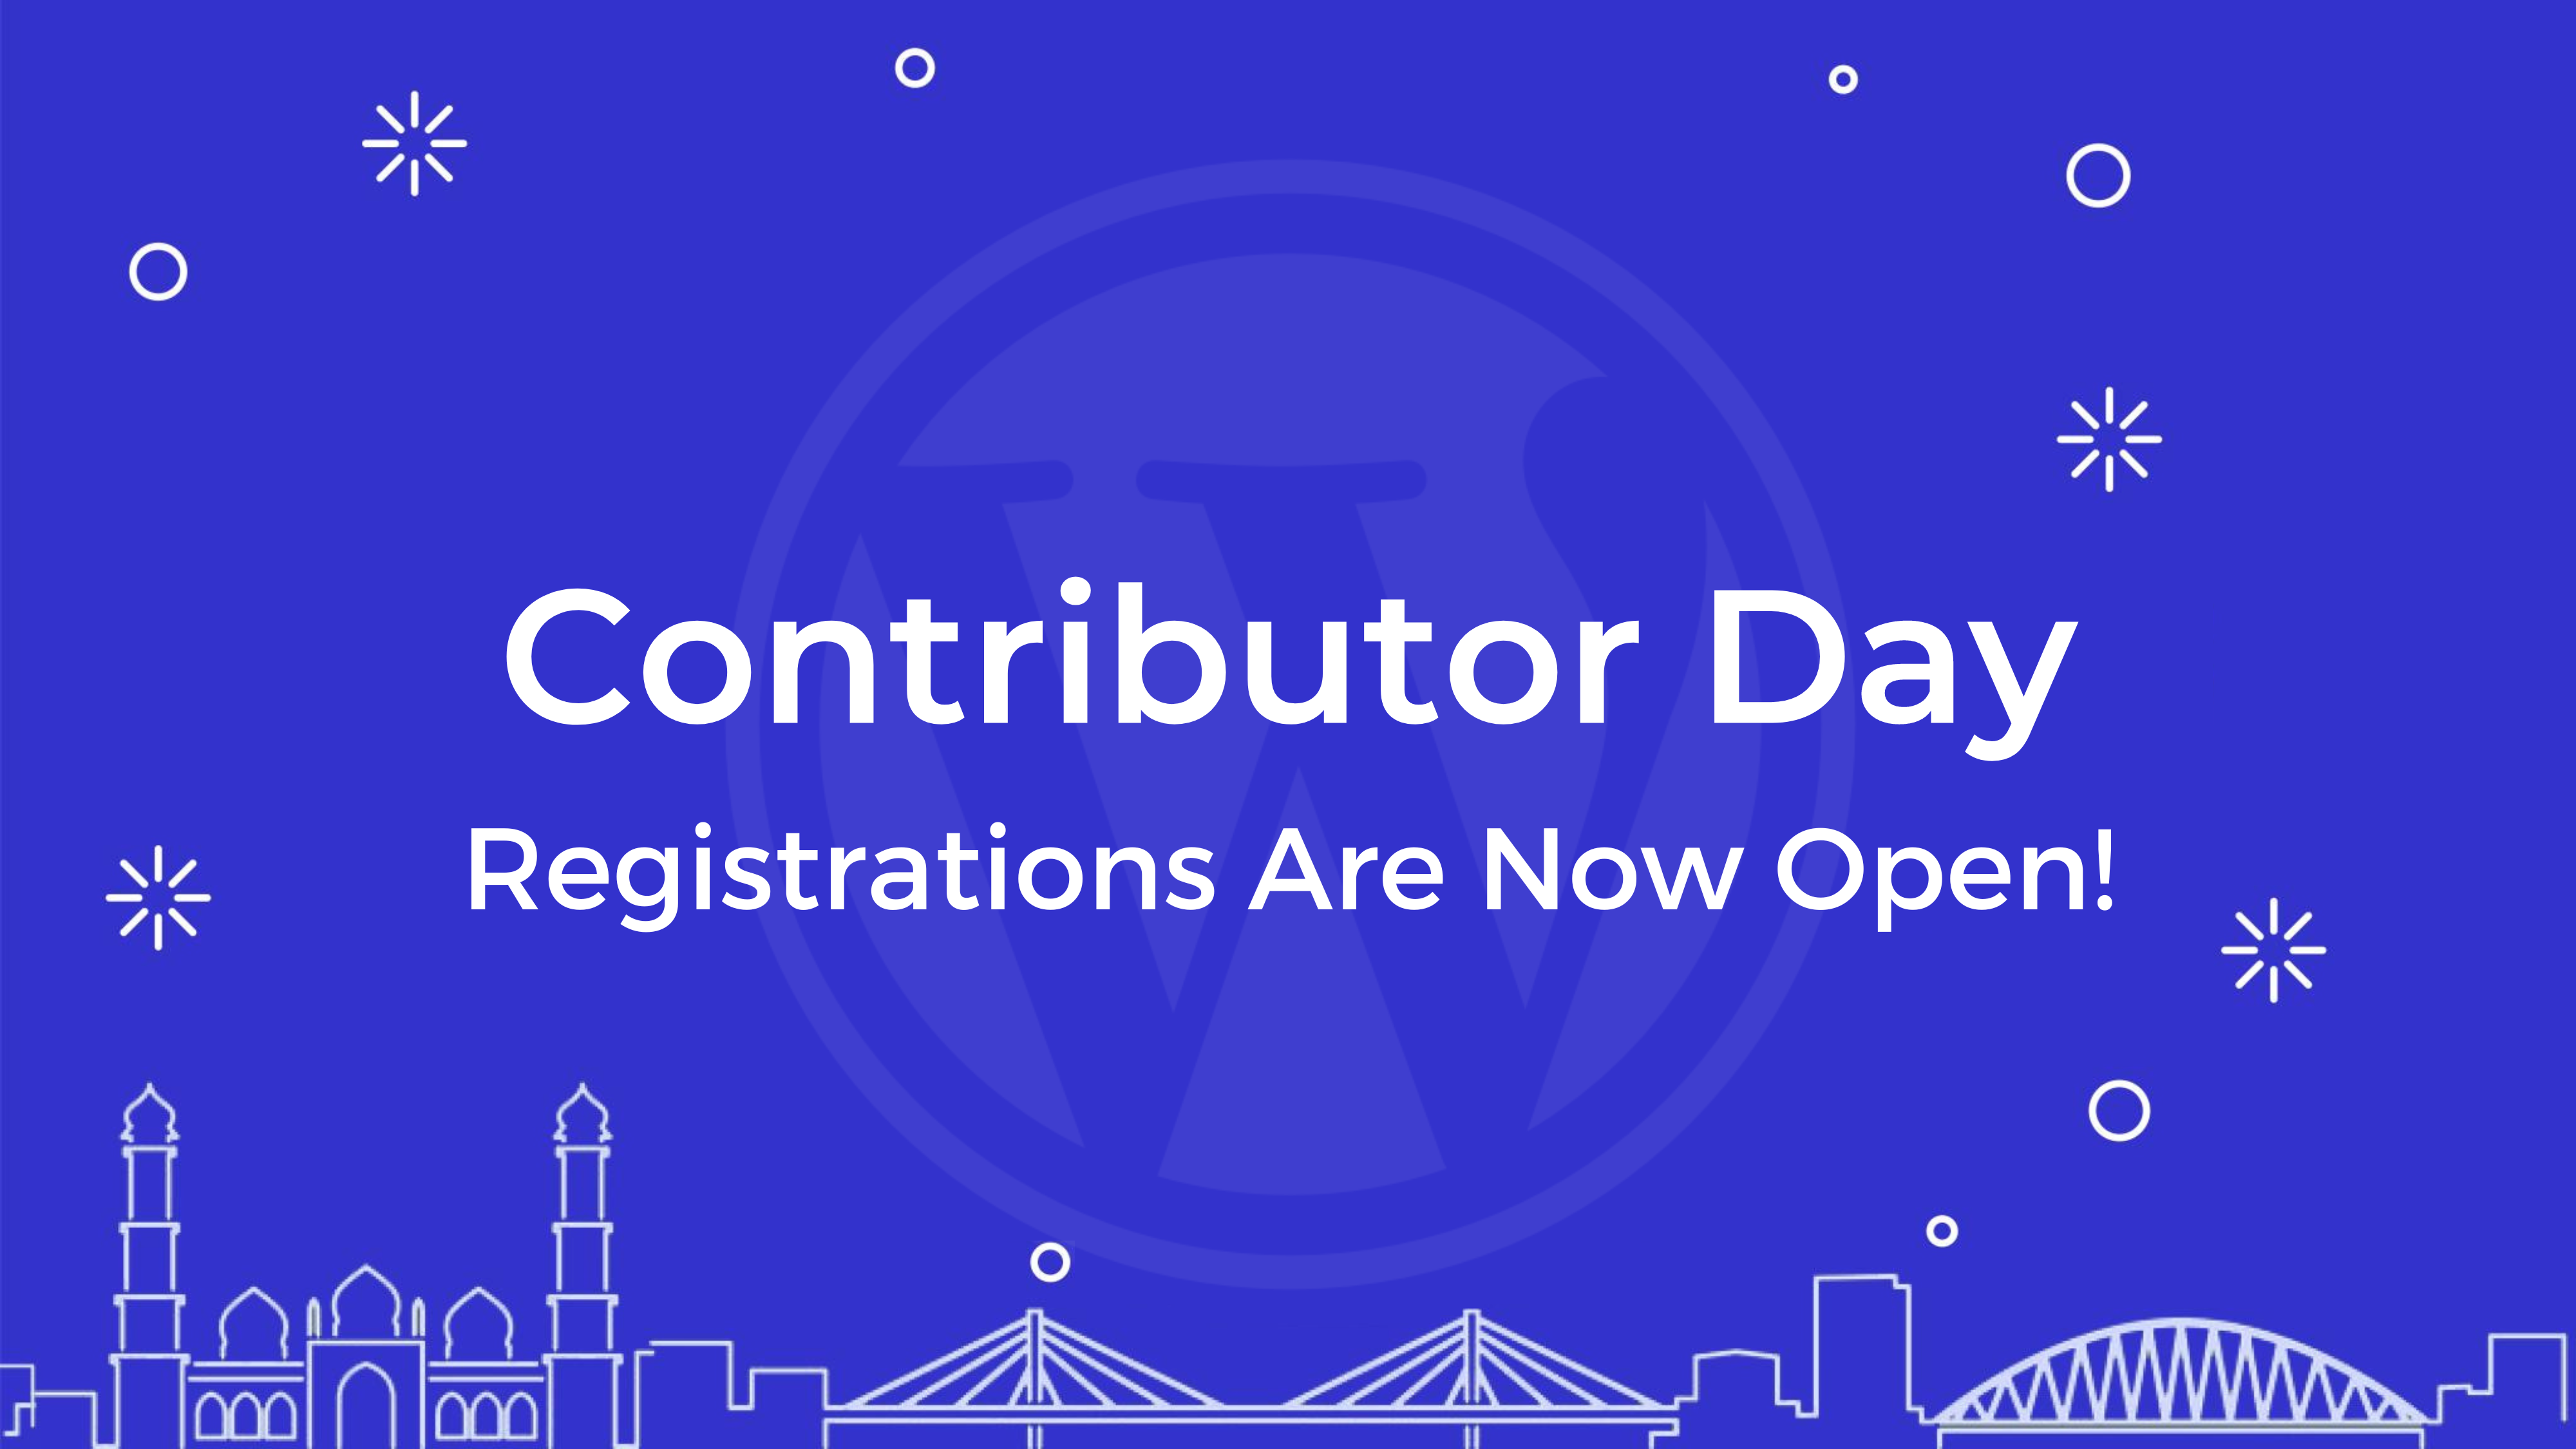 Registrations Are Now Open for Contributor Day and Openverse Walk!